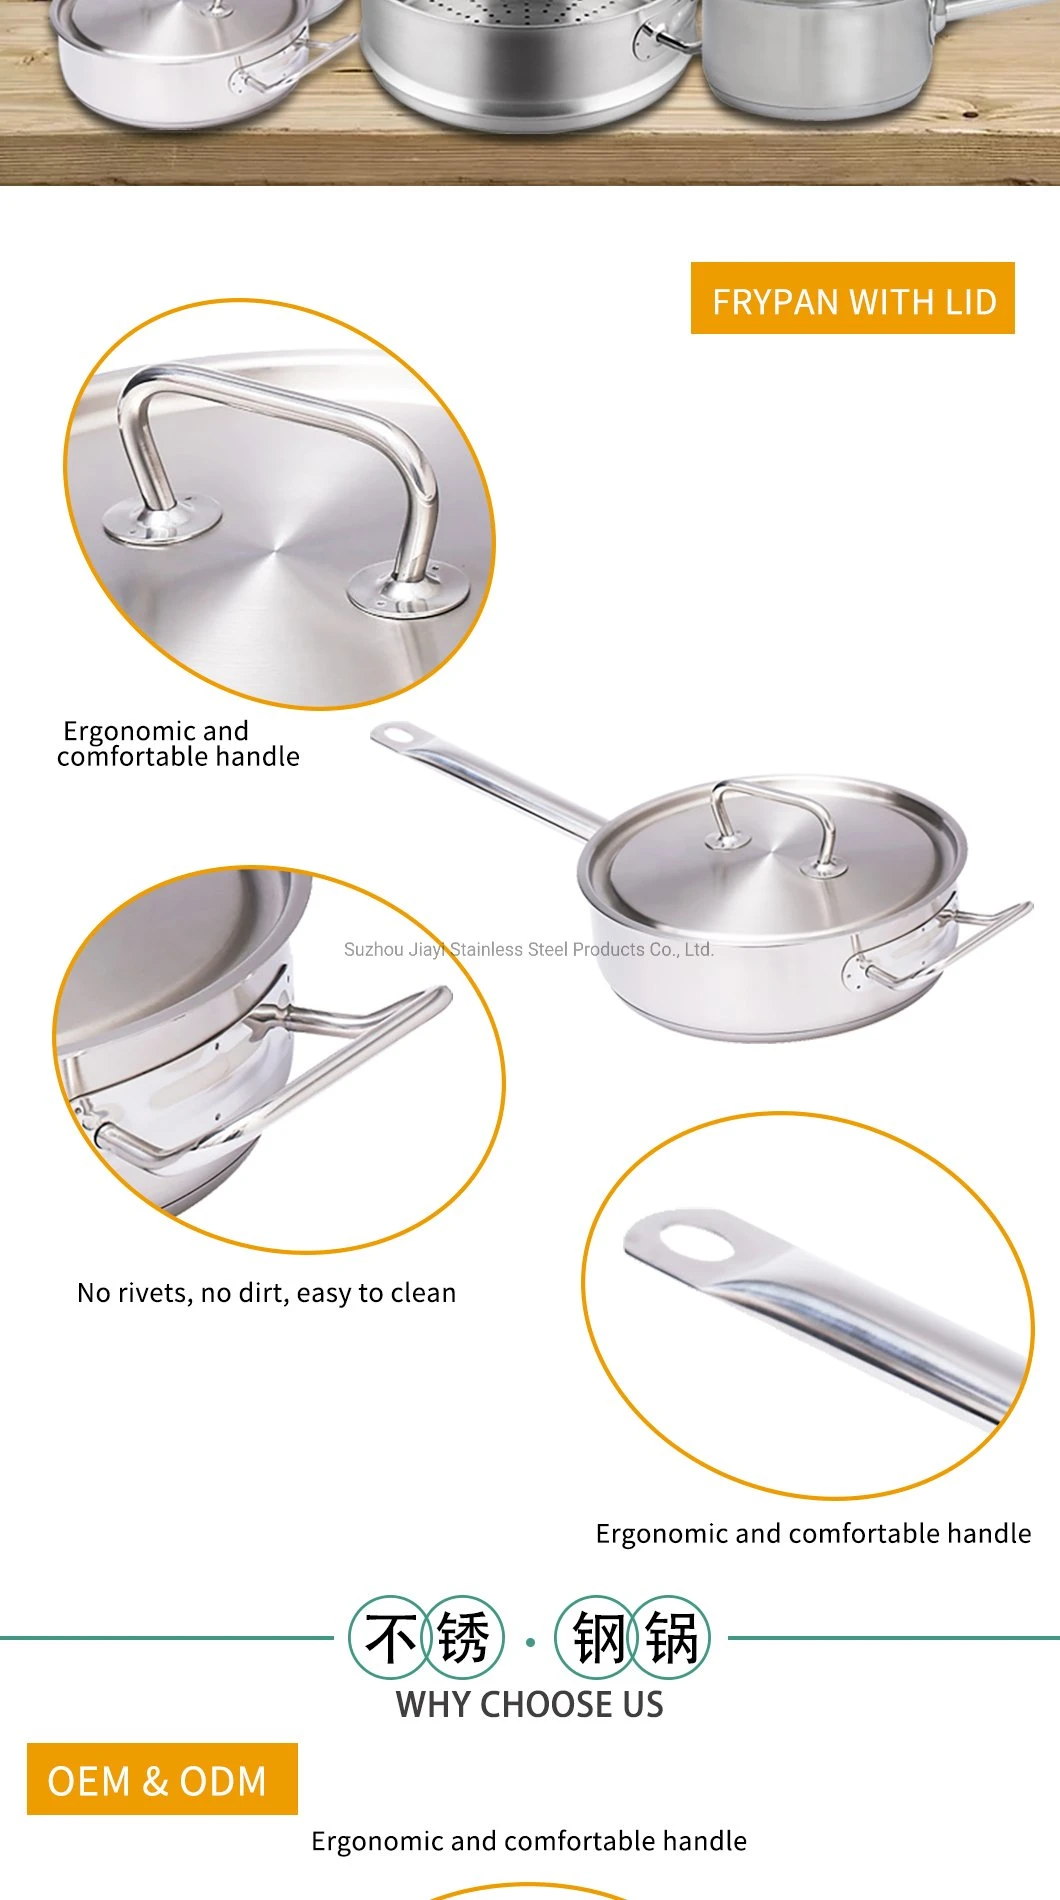 Wholesale Stainless Steel Pan Non Stick Coating Induction Frying Pan Saucepan